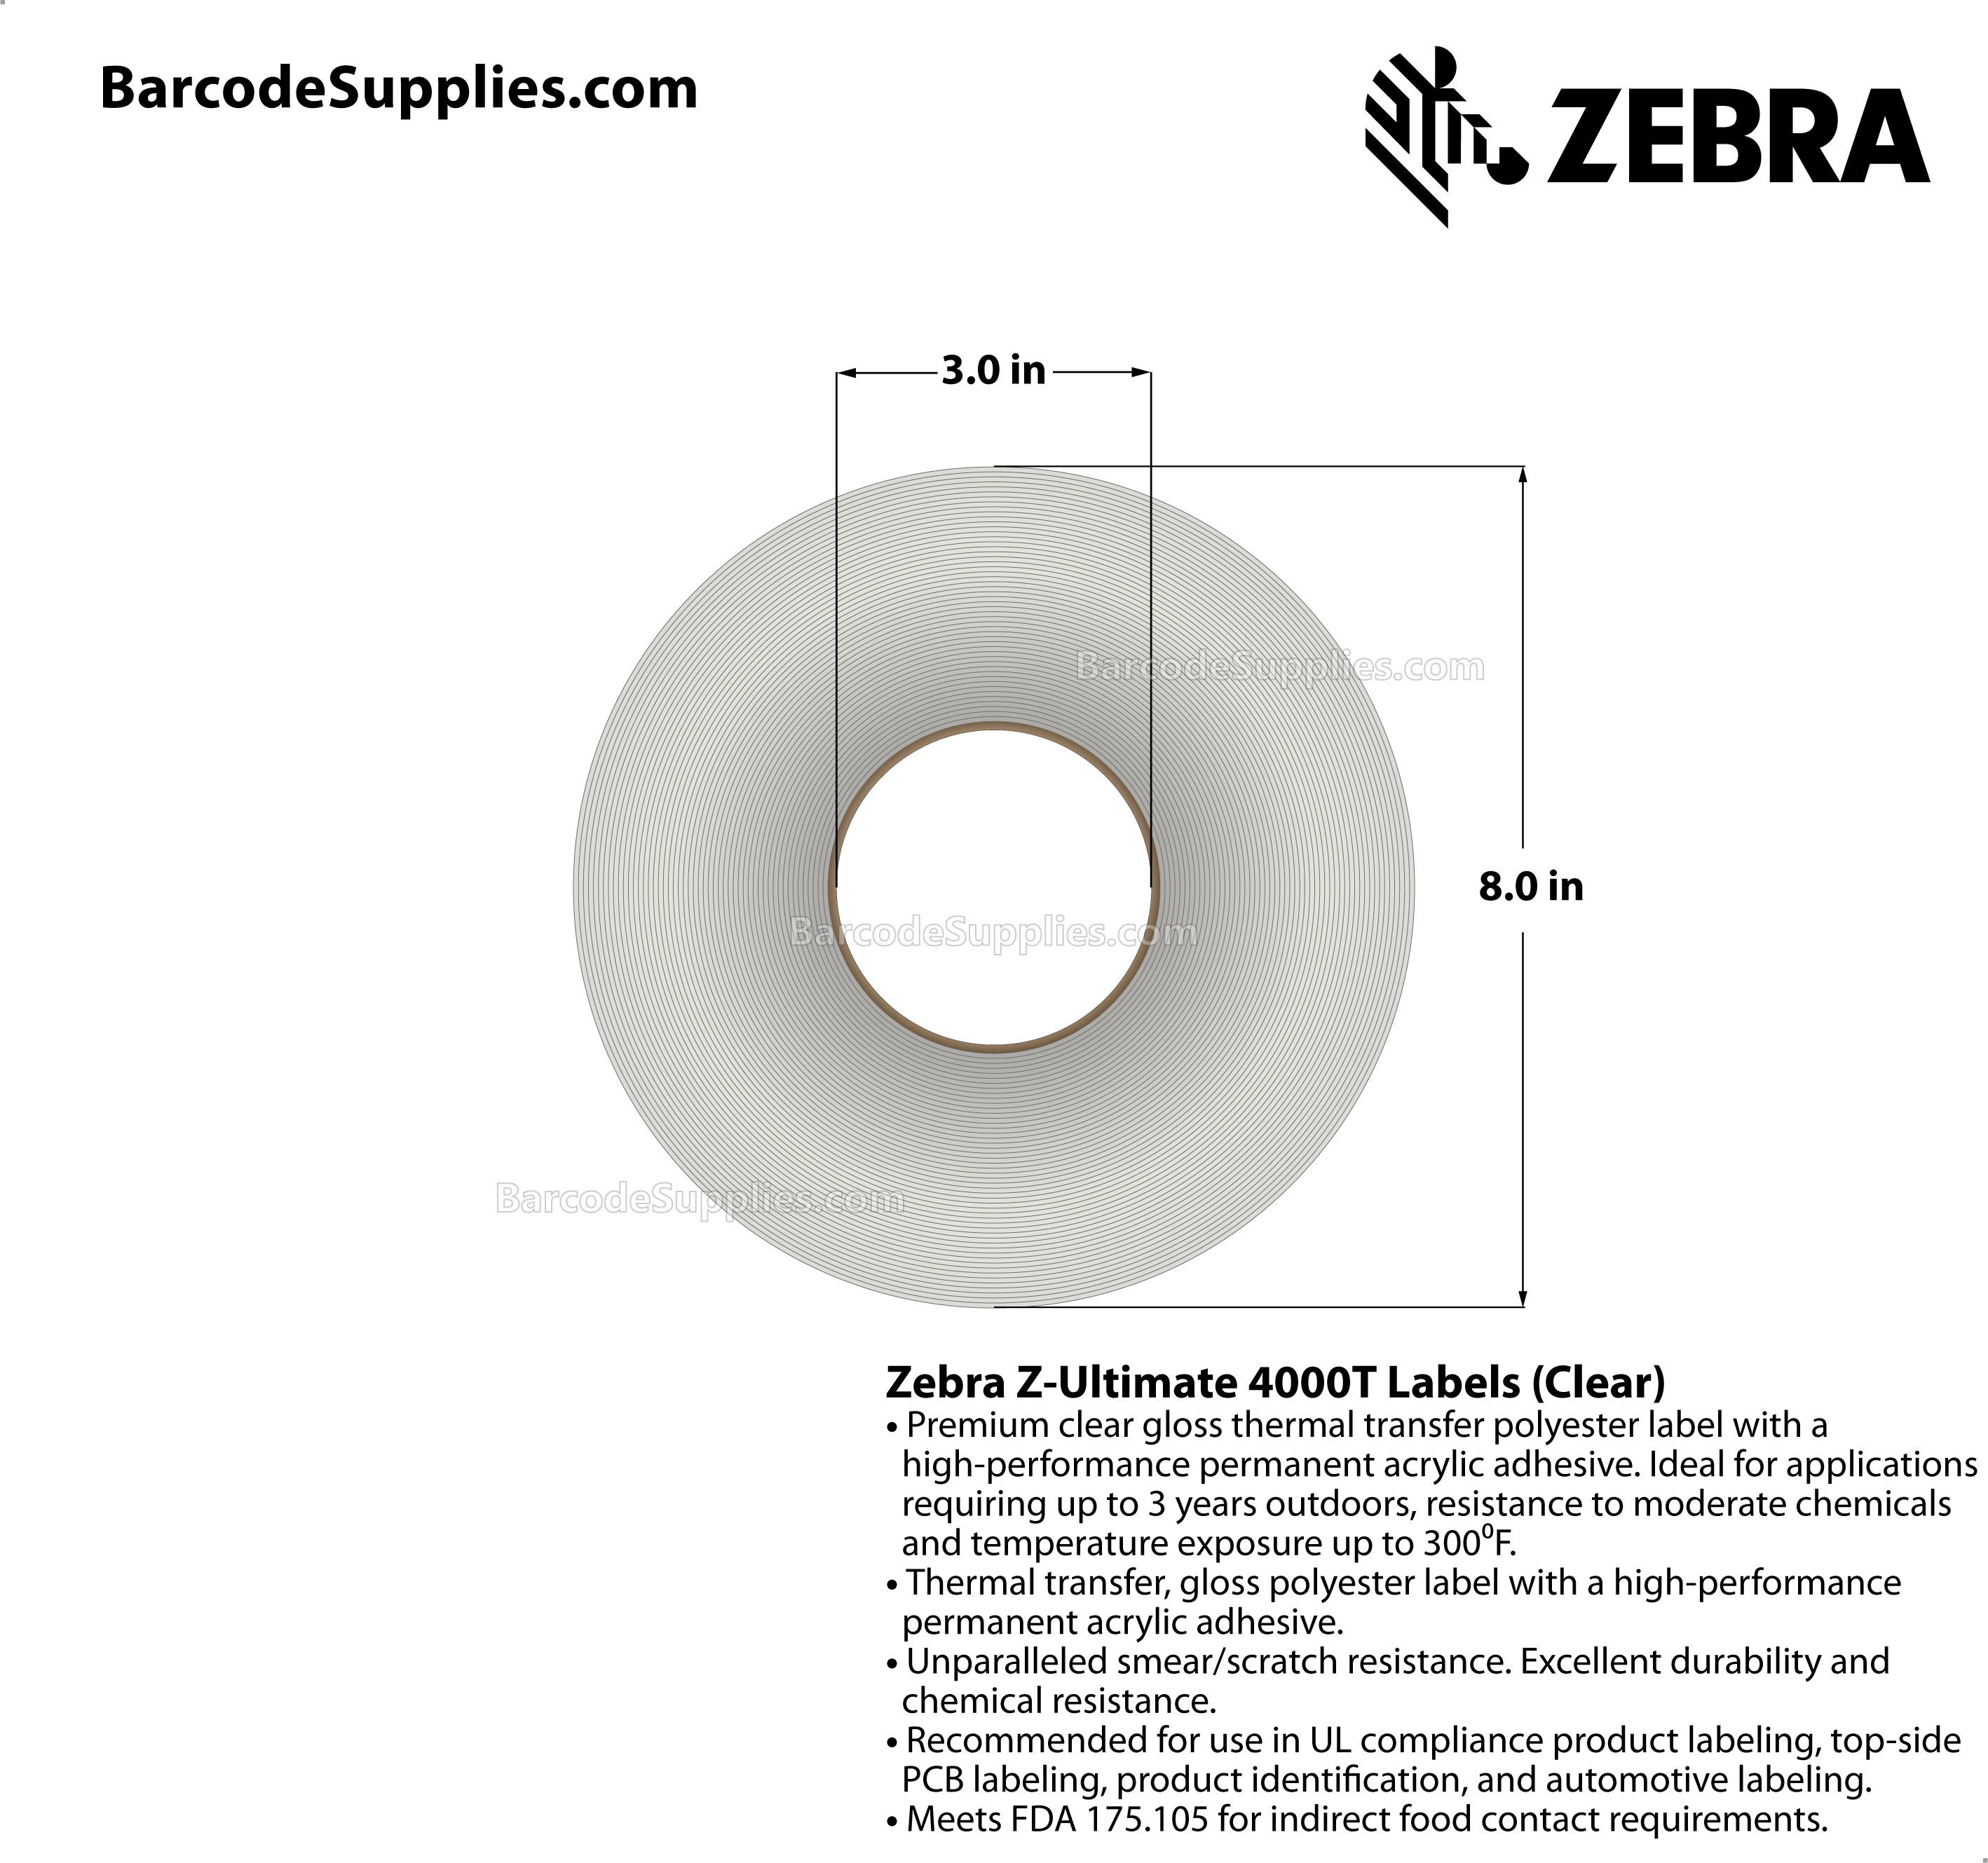 3 x 2 Thermal Transfer Clear Z-Ultimate 4000T Clear Labels With Permanent Adhesive - Notch sensing - Perforated - 1000 Labels Per Roll - Carton Of 1 Rolls - 1000 Labels Total - MPN: 10023048